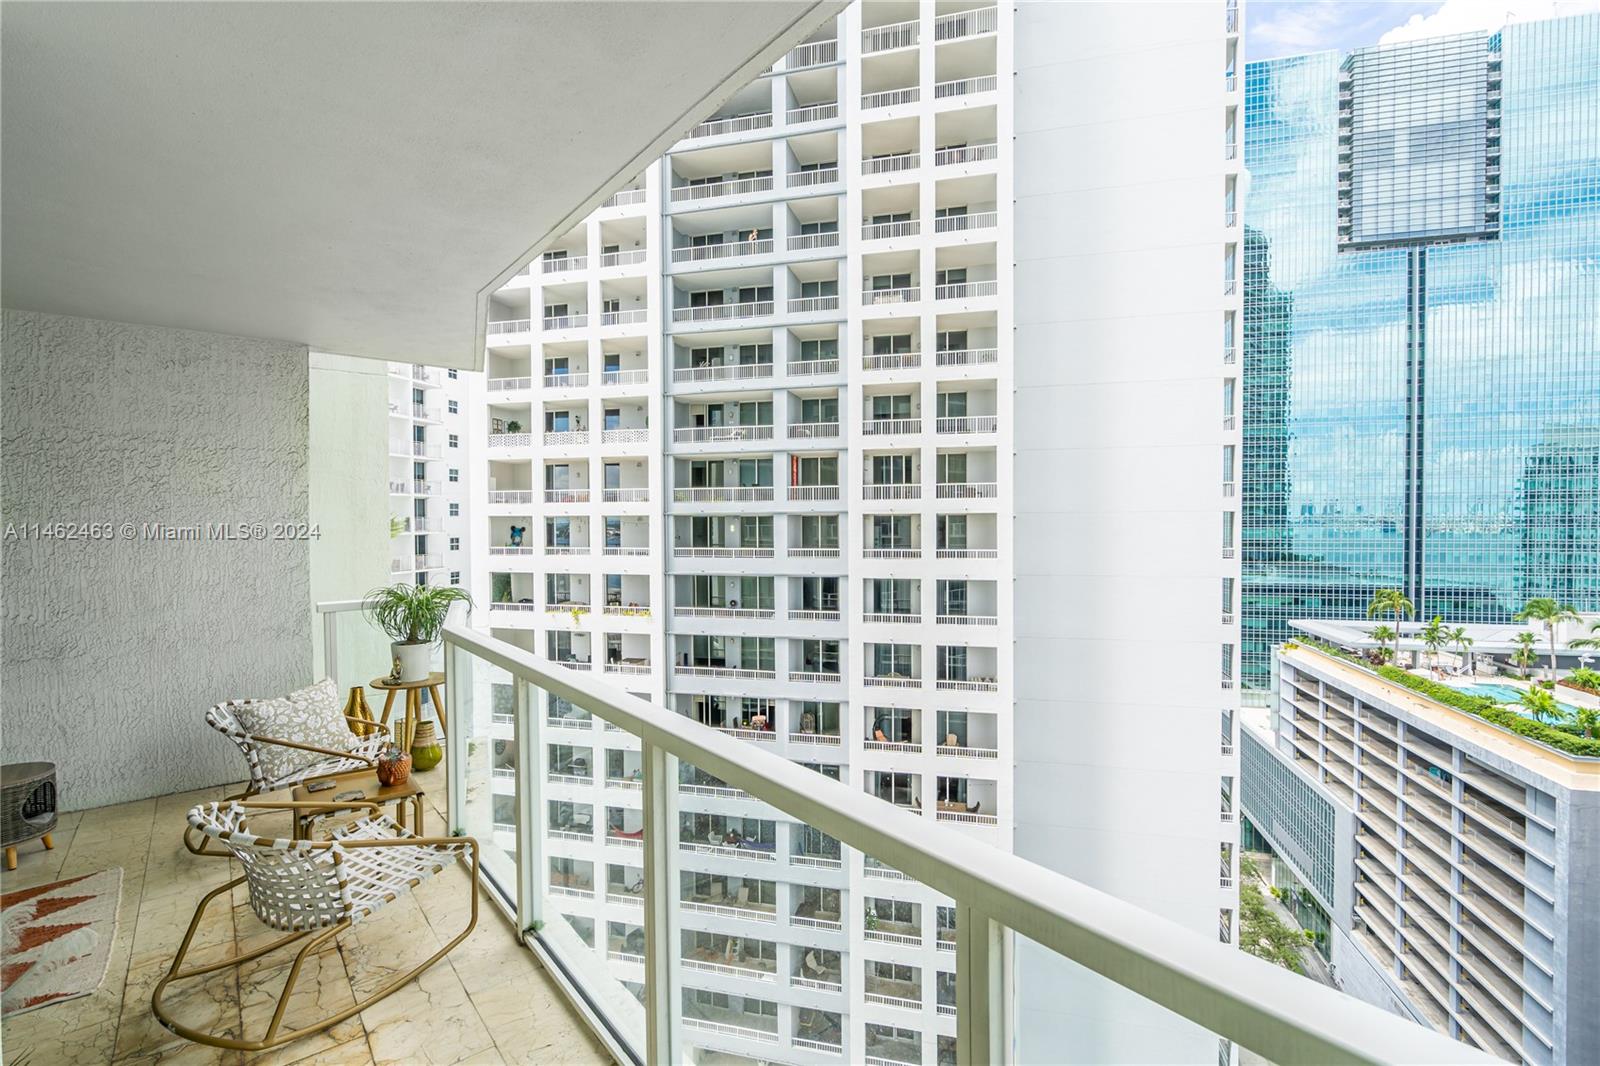 218 SE 14th St 1904, Miami, Florida 33131, 1 Bedroom Bedrooms, ,1 BathroomBathrooms,Residential,For Sale,218 SE 14th St 1904,A11462463